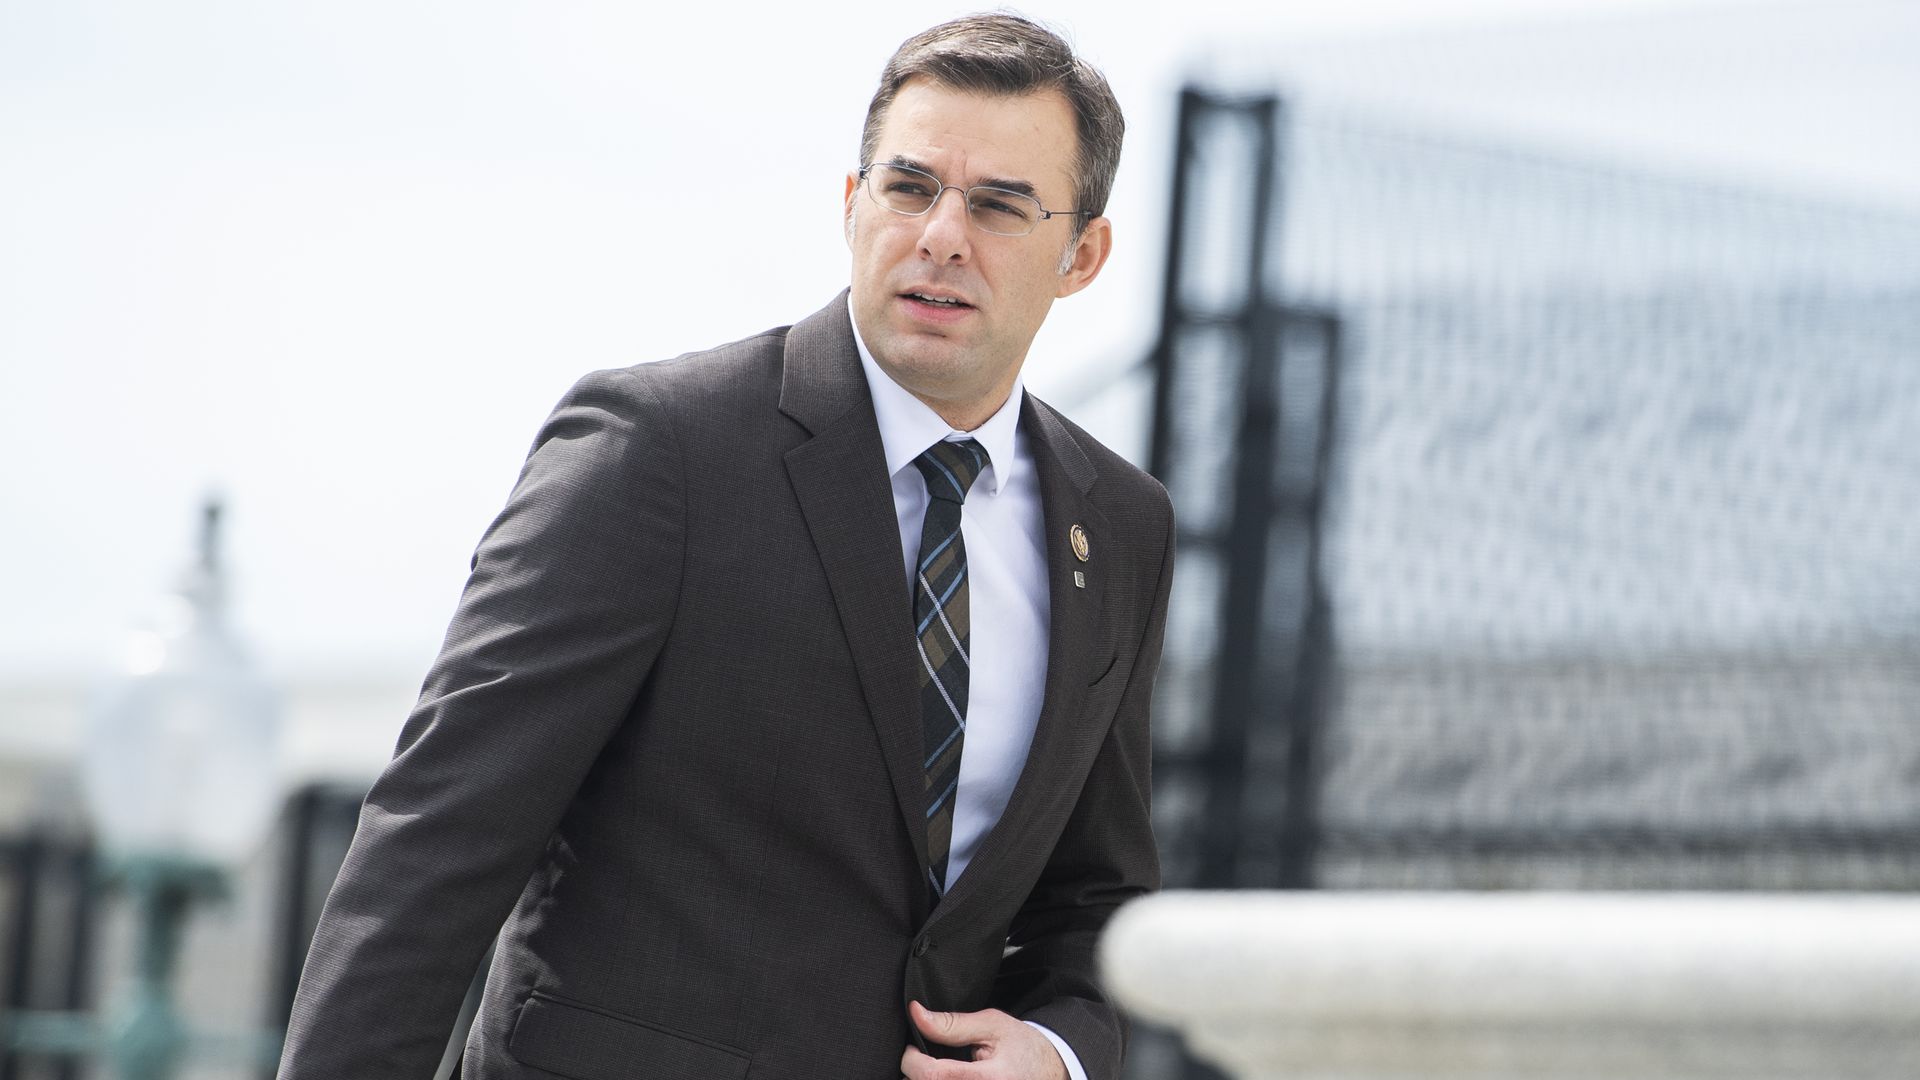 Rep. Justin Amash, I-Mich., is seen on the House steps of the Capitol before the House passed a $2 trillion coronavirus aid package by voice vote on Friday, March 27